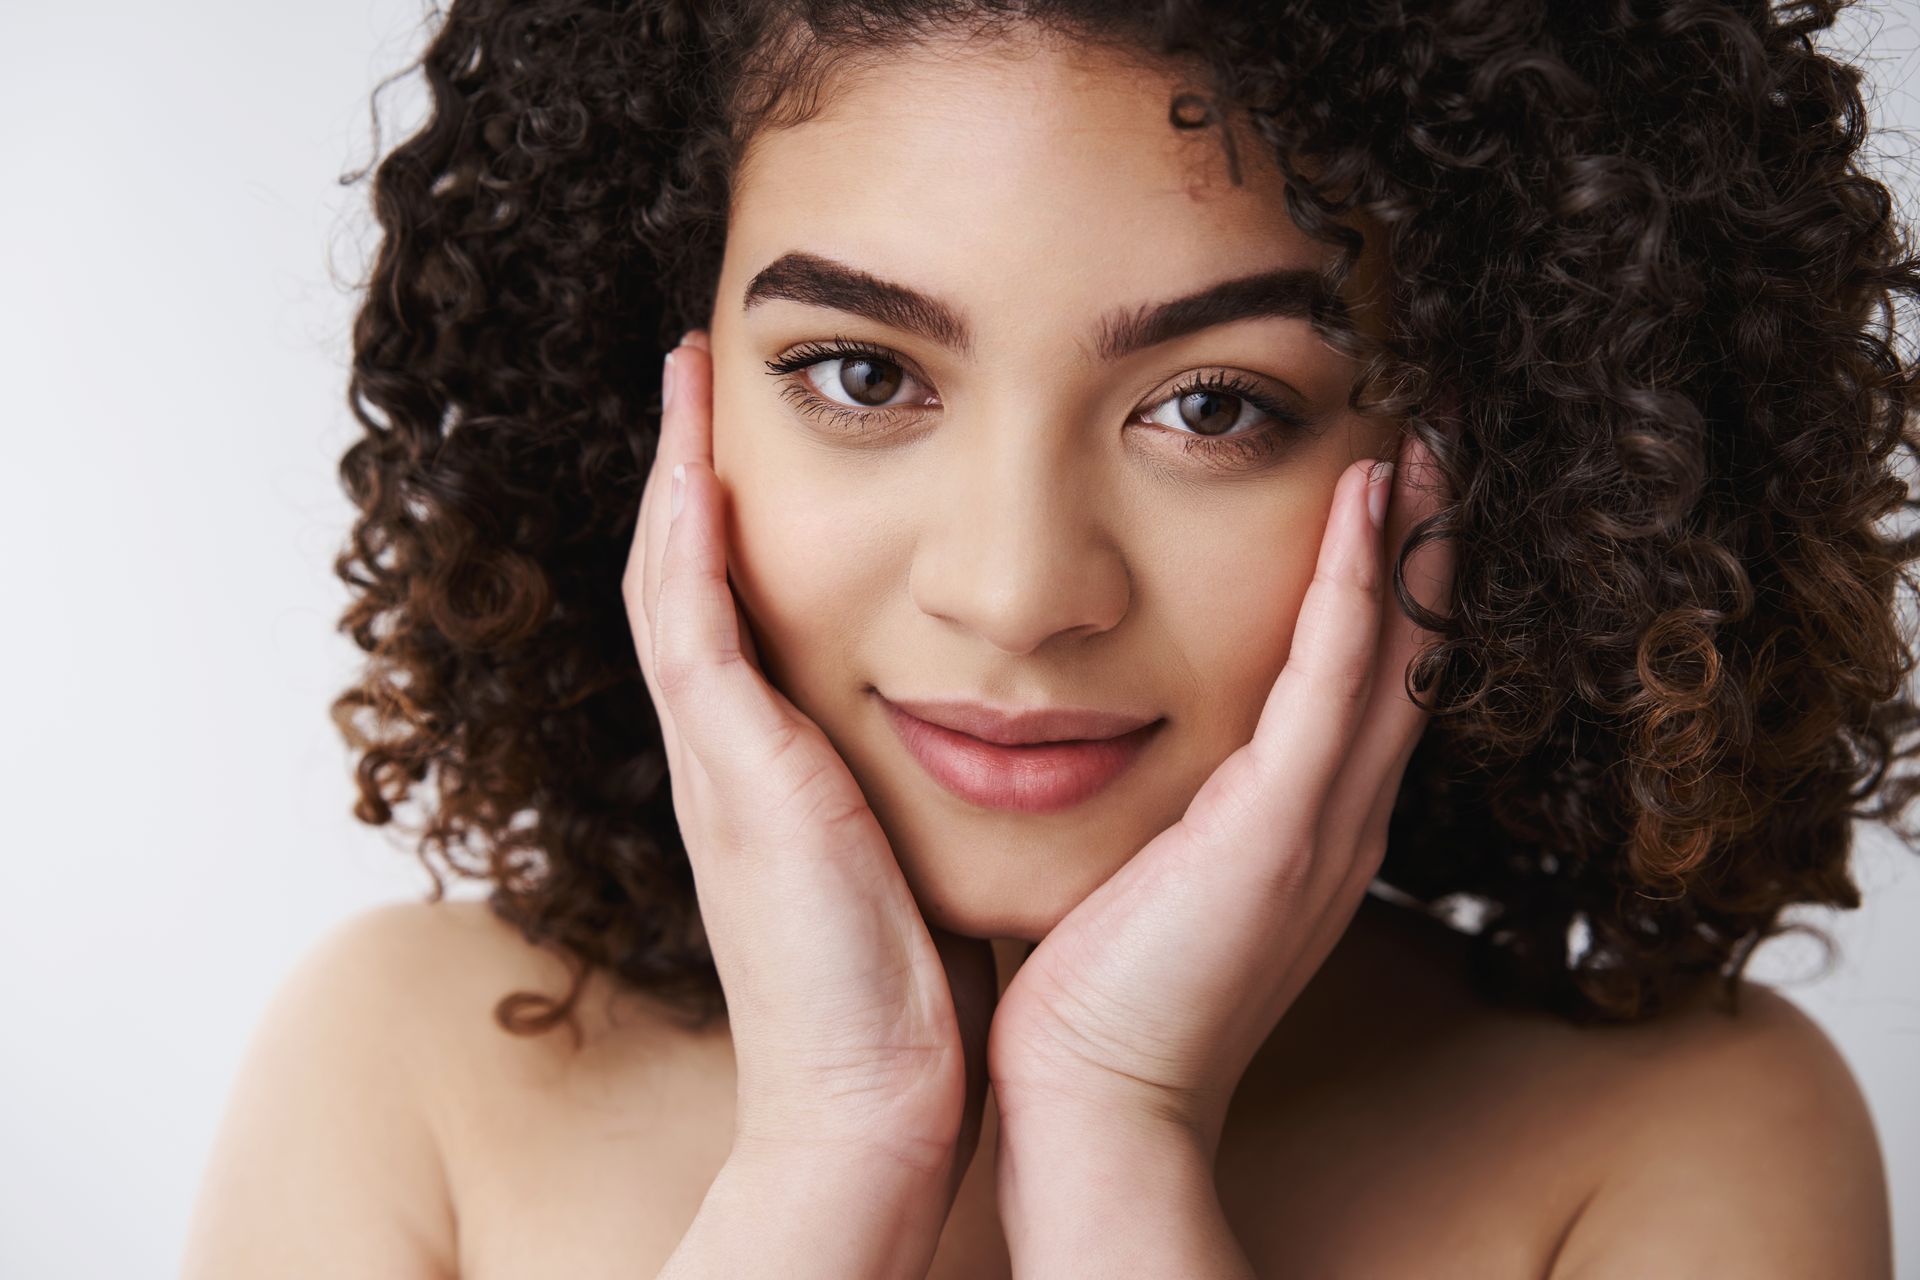 a woman with curly hair is touching her face with her hands